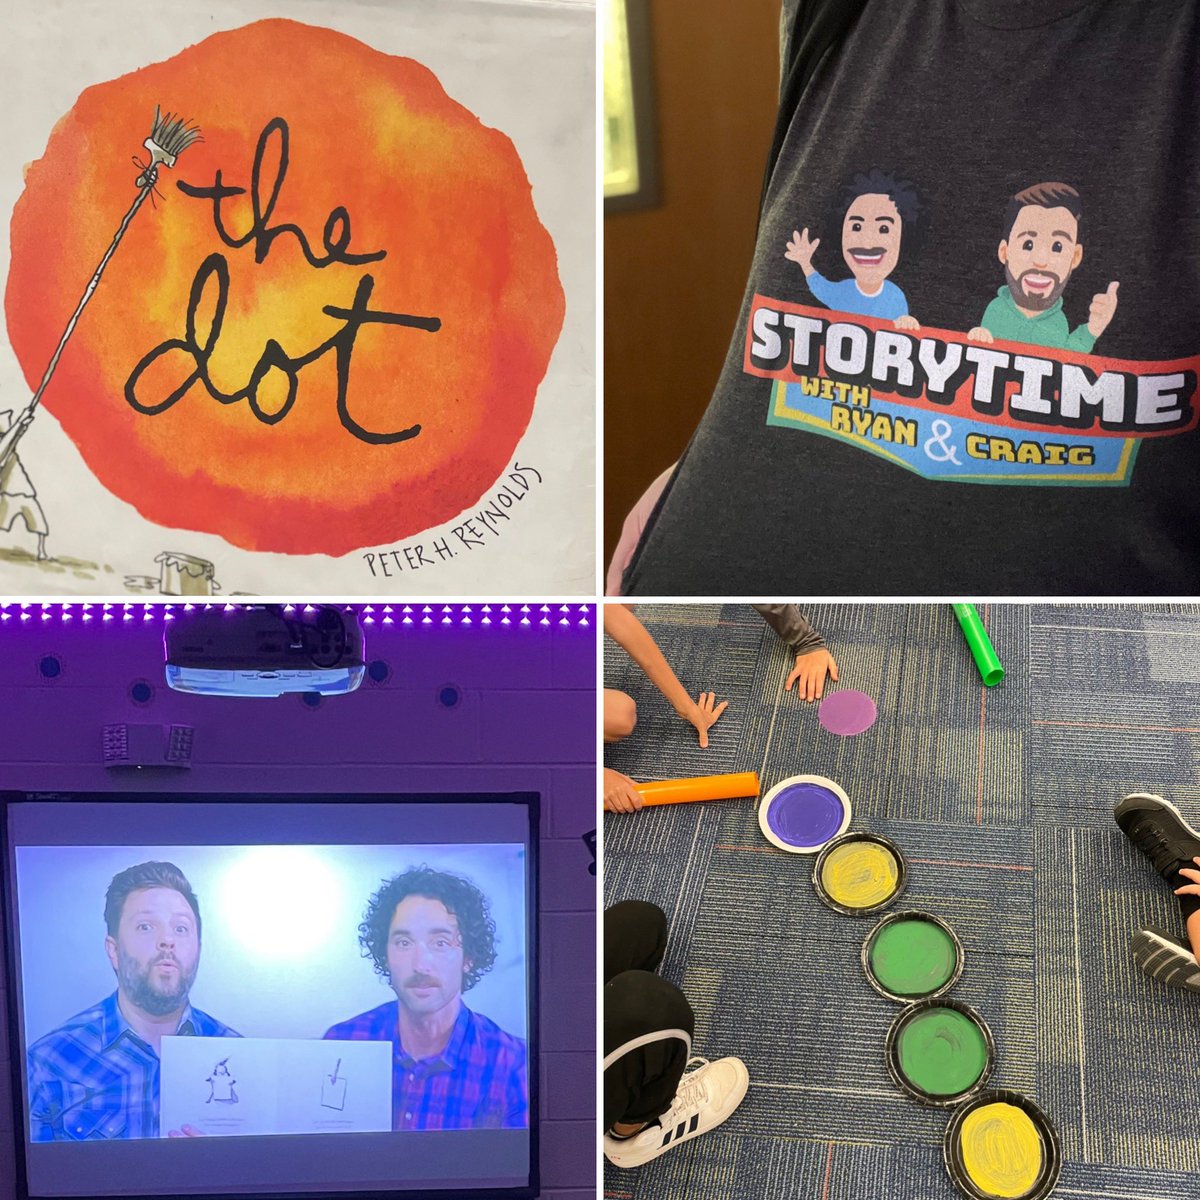 Dot day festivities have started in music class! @FairviewES_NC @UCPSNC @peterhreynolds @storytime_show #thedot #dotday #teamucps #MakeYourMark